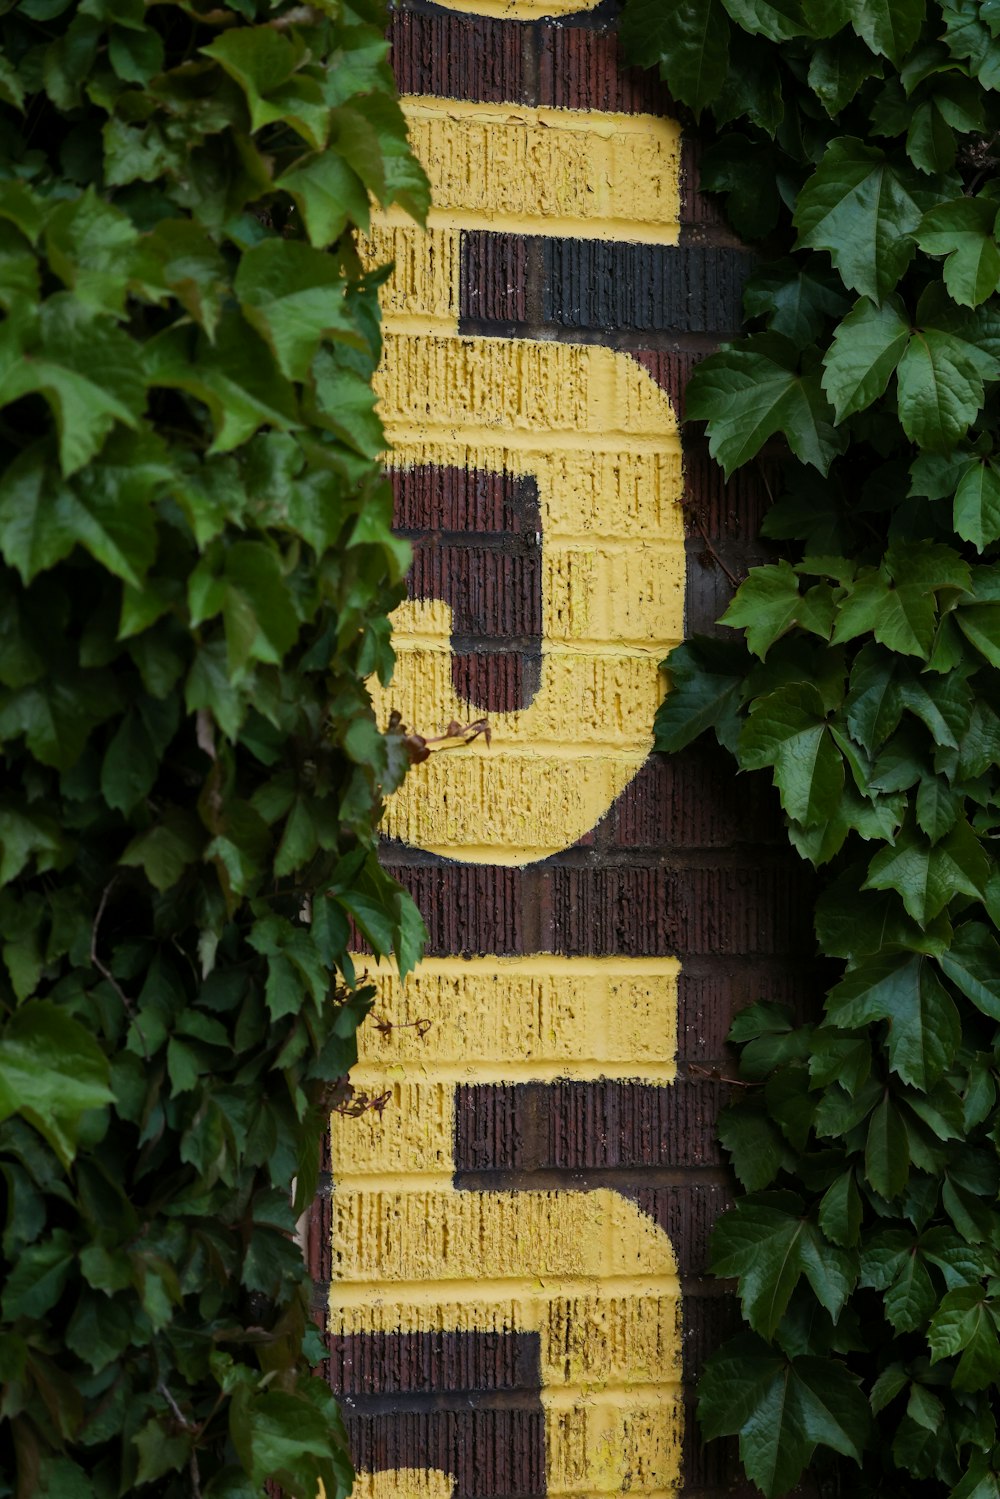 a close up of a street sign on a brick wall